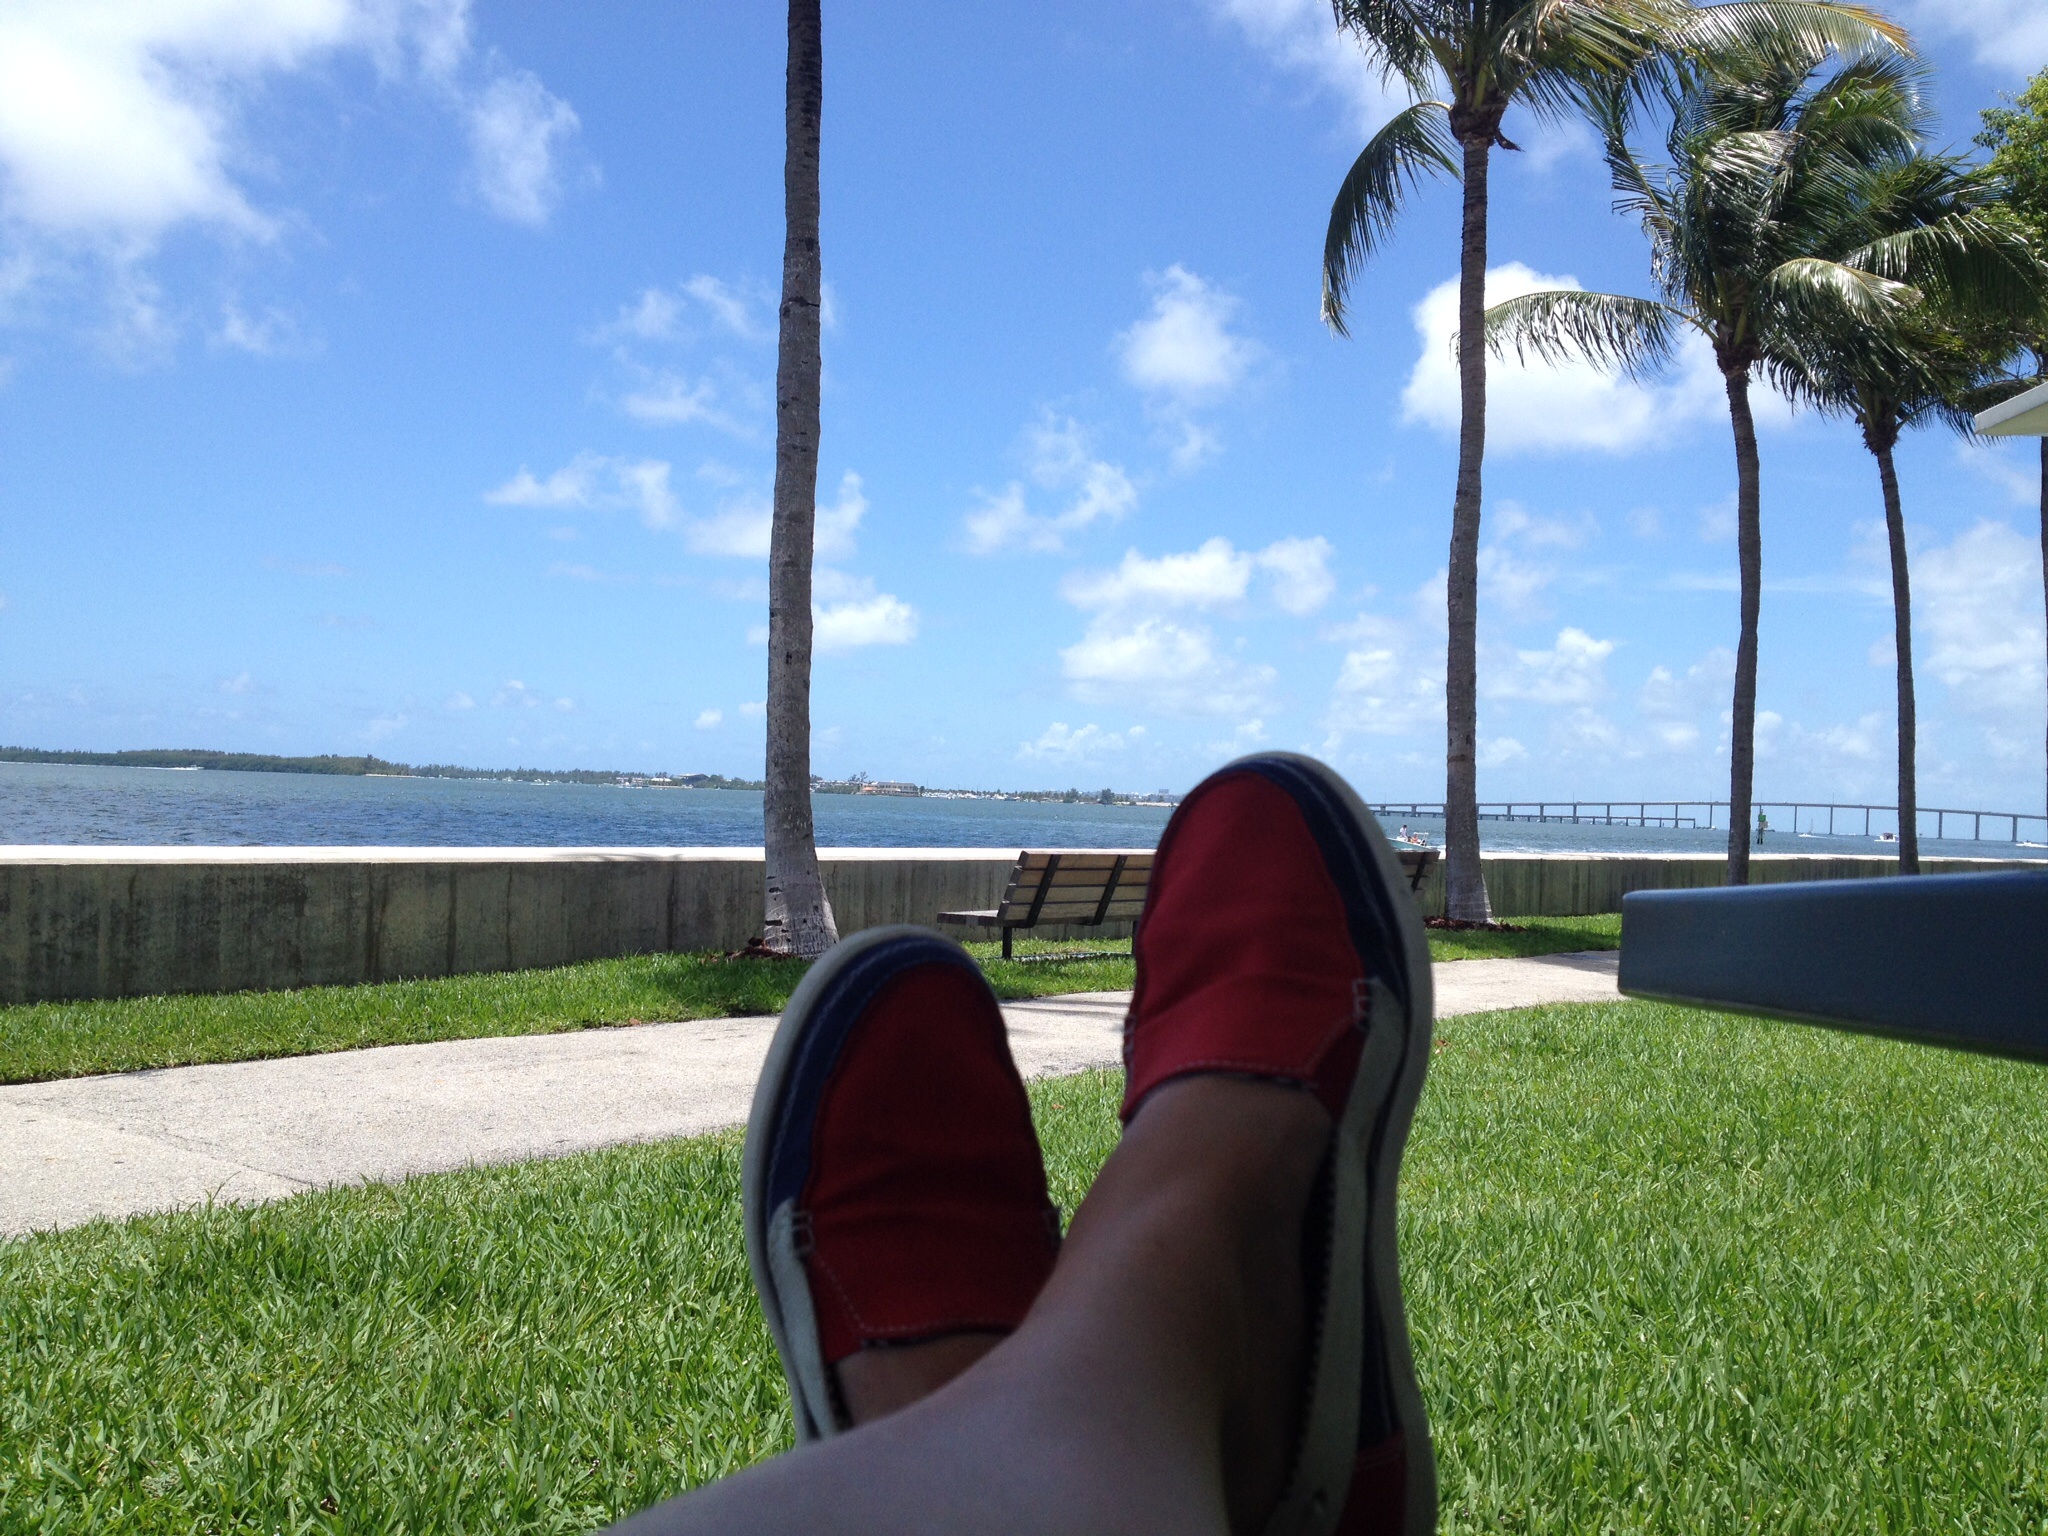 Relaxing by the bay, under the palm trees after a cycle.